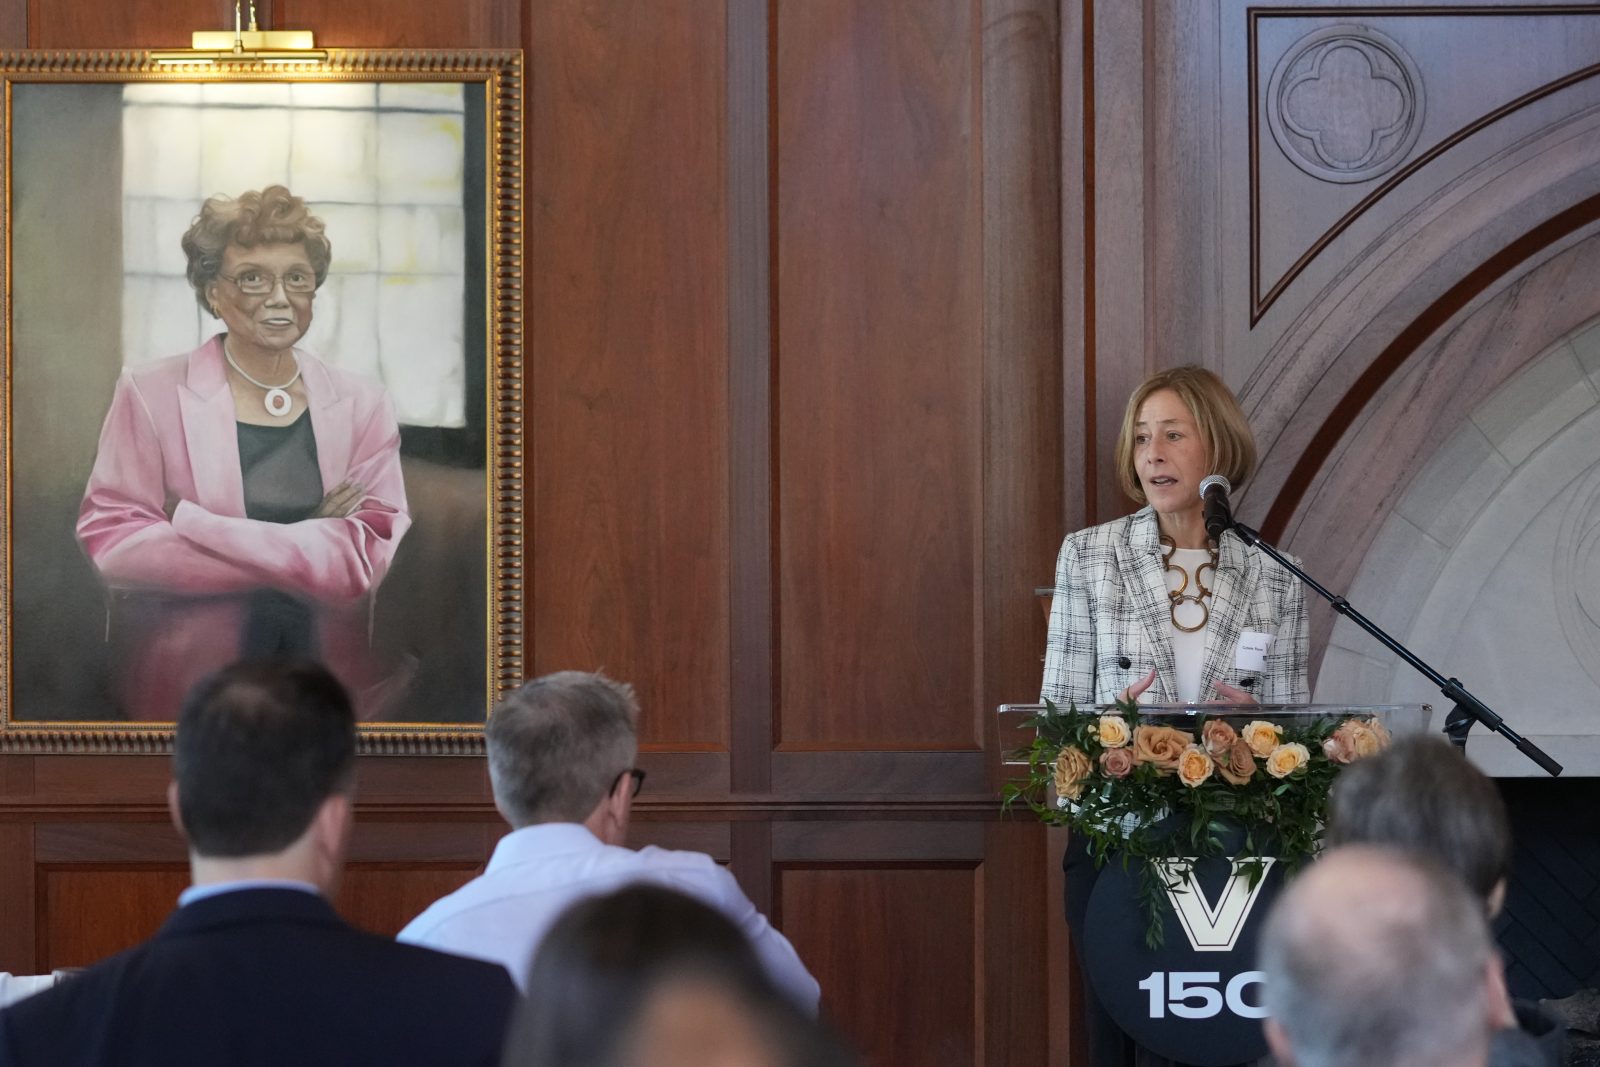 Provost and Vice Chancellor for Academic Affairs C. Cybele Raver (at podium) delivers remarks at the unveiling of the latest portraits in the Vanderbilt Trailblazers series, including that of Tommie Morton-Young. (Joe Howell)